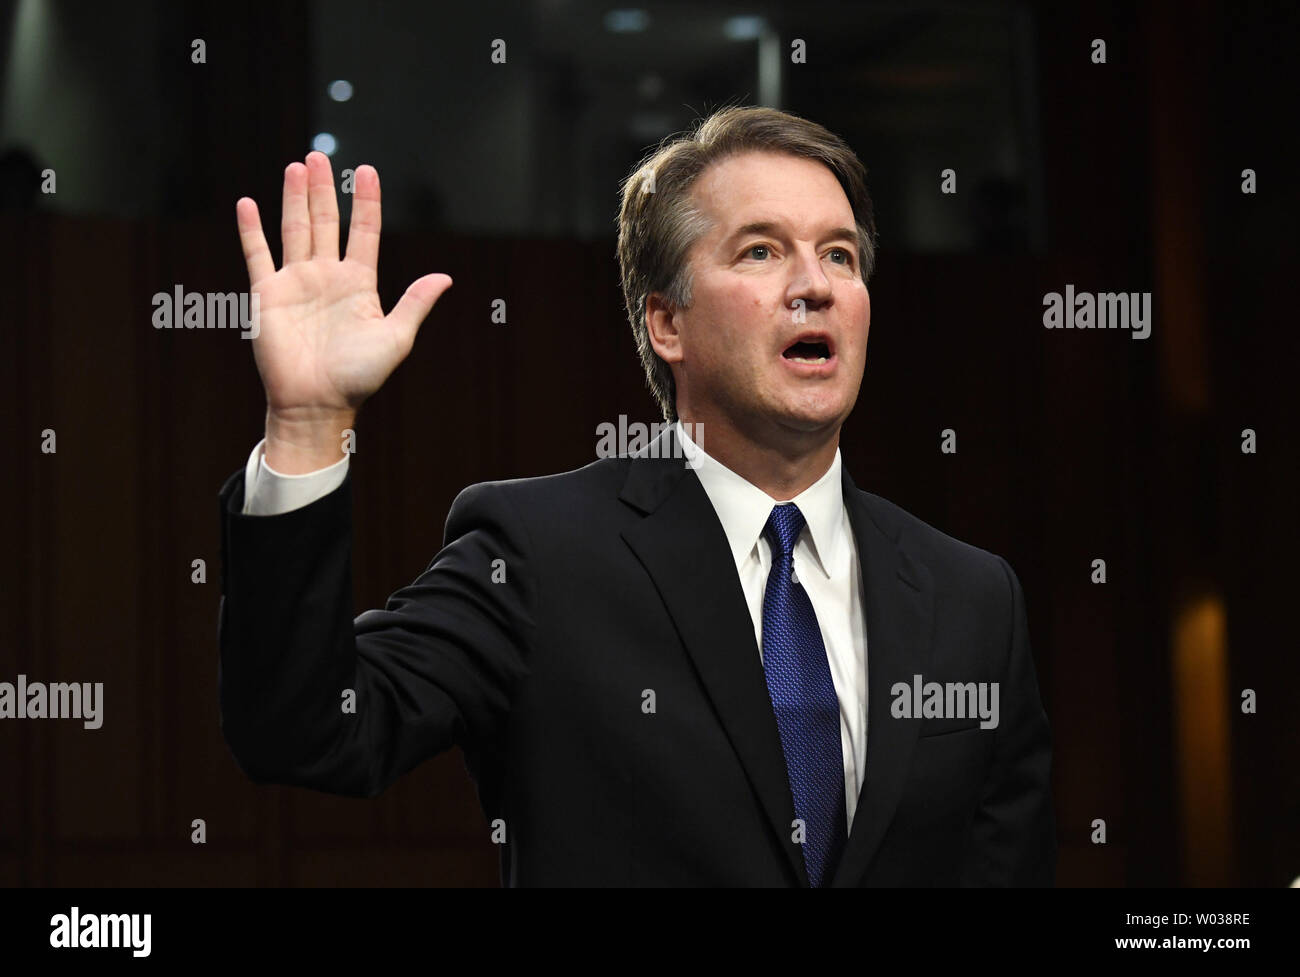 Brett M. Kavanaugh, President Trump's nominee to be the next Supreme Court associate justice, is sworn-in before delivering his opening statement on the first day of his confirmation hearing before the Senate Judiciary Committee, on Capitol Hill in Washington, D.C., on September 4, 2018. Judge Kavanaugh was nominated to fill the seat of Justice Anthony M. Kennedy who announced his retirement in June. Photo by Pat Benic/UPI Stock Photo